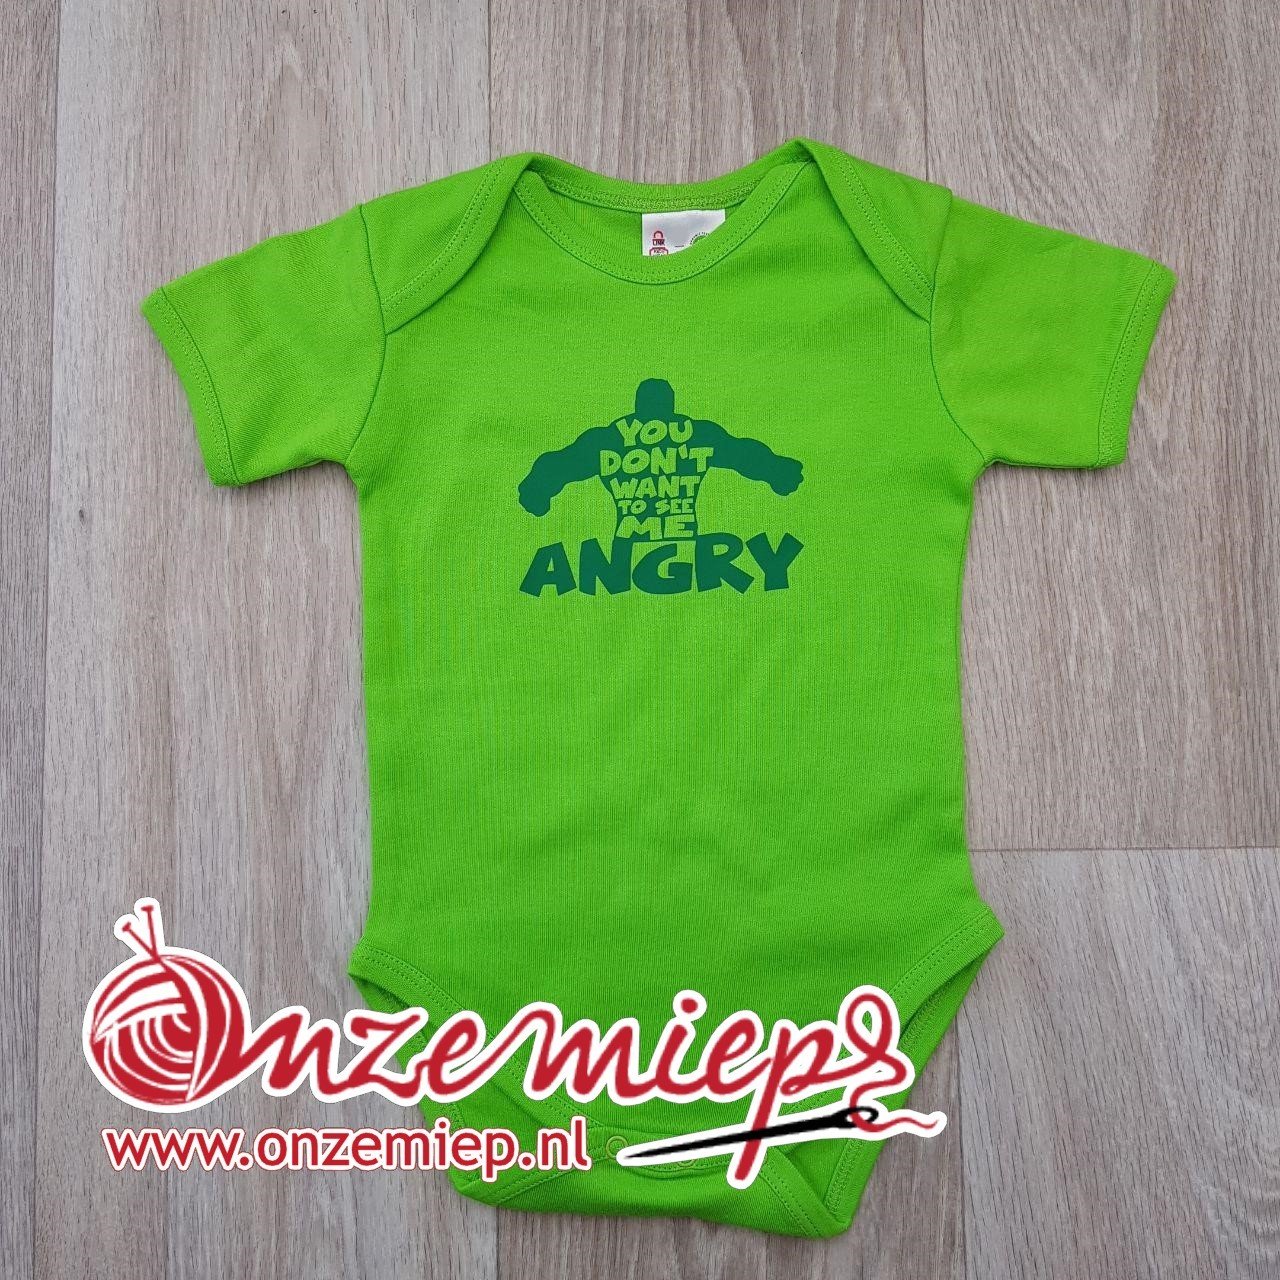 Groene romper met "You don't want to see me angry"